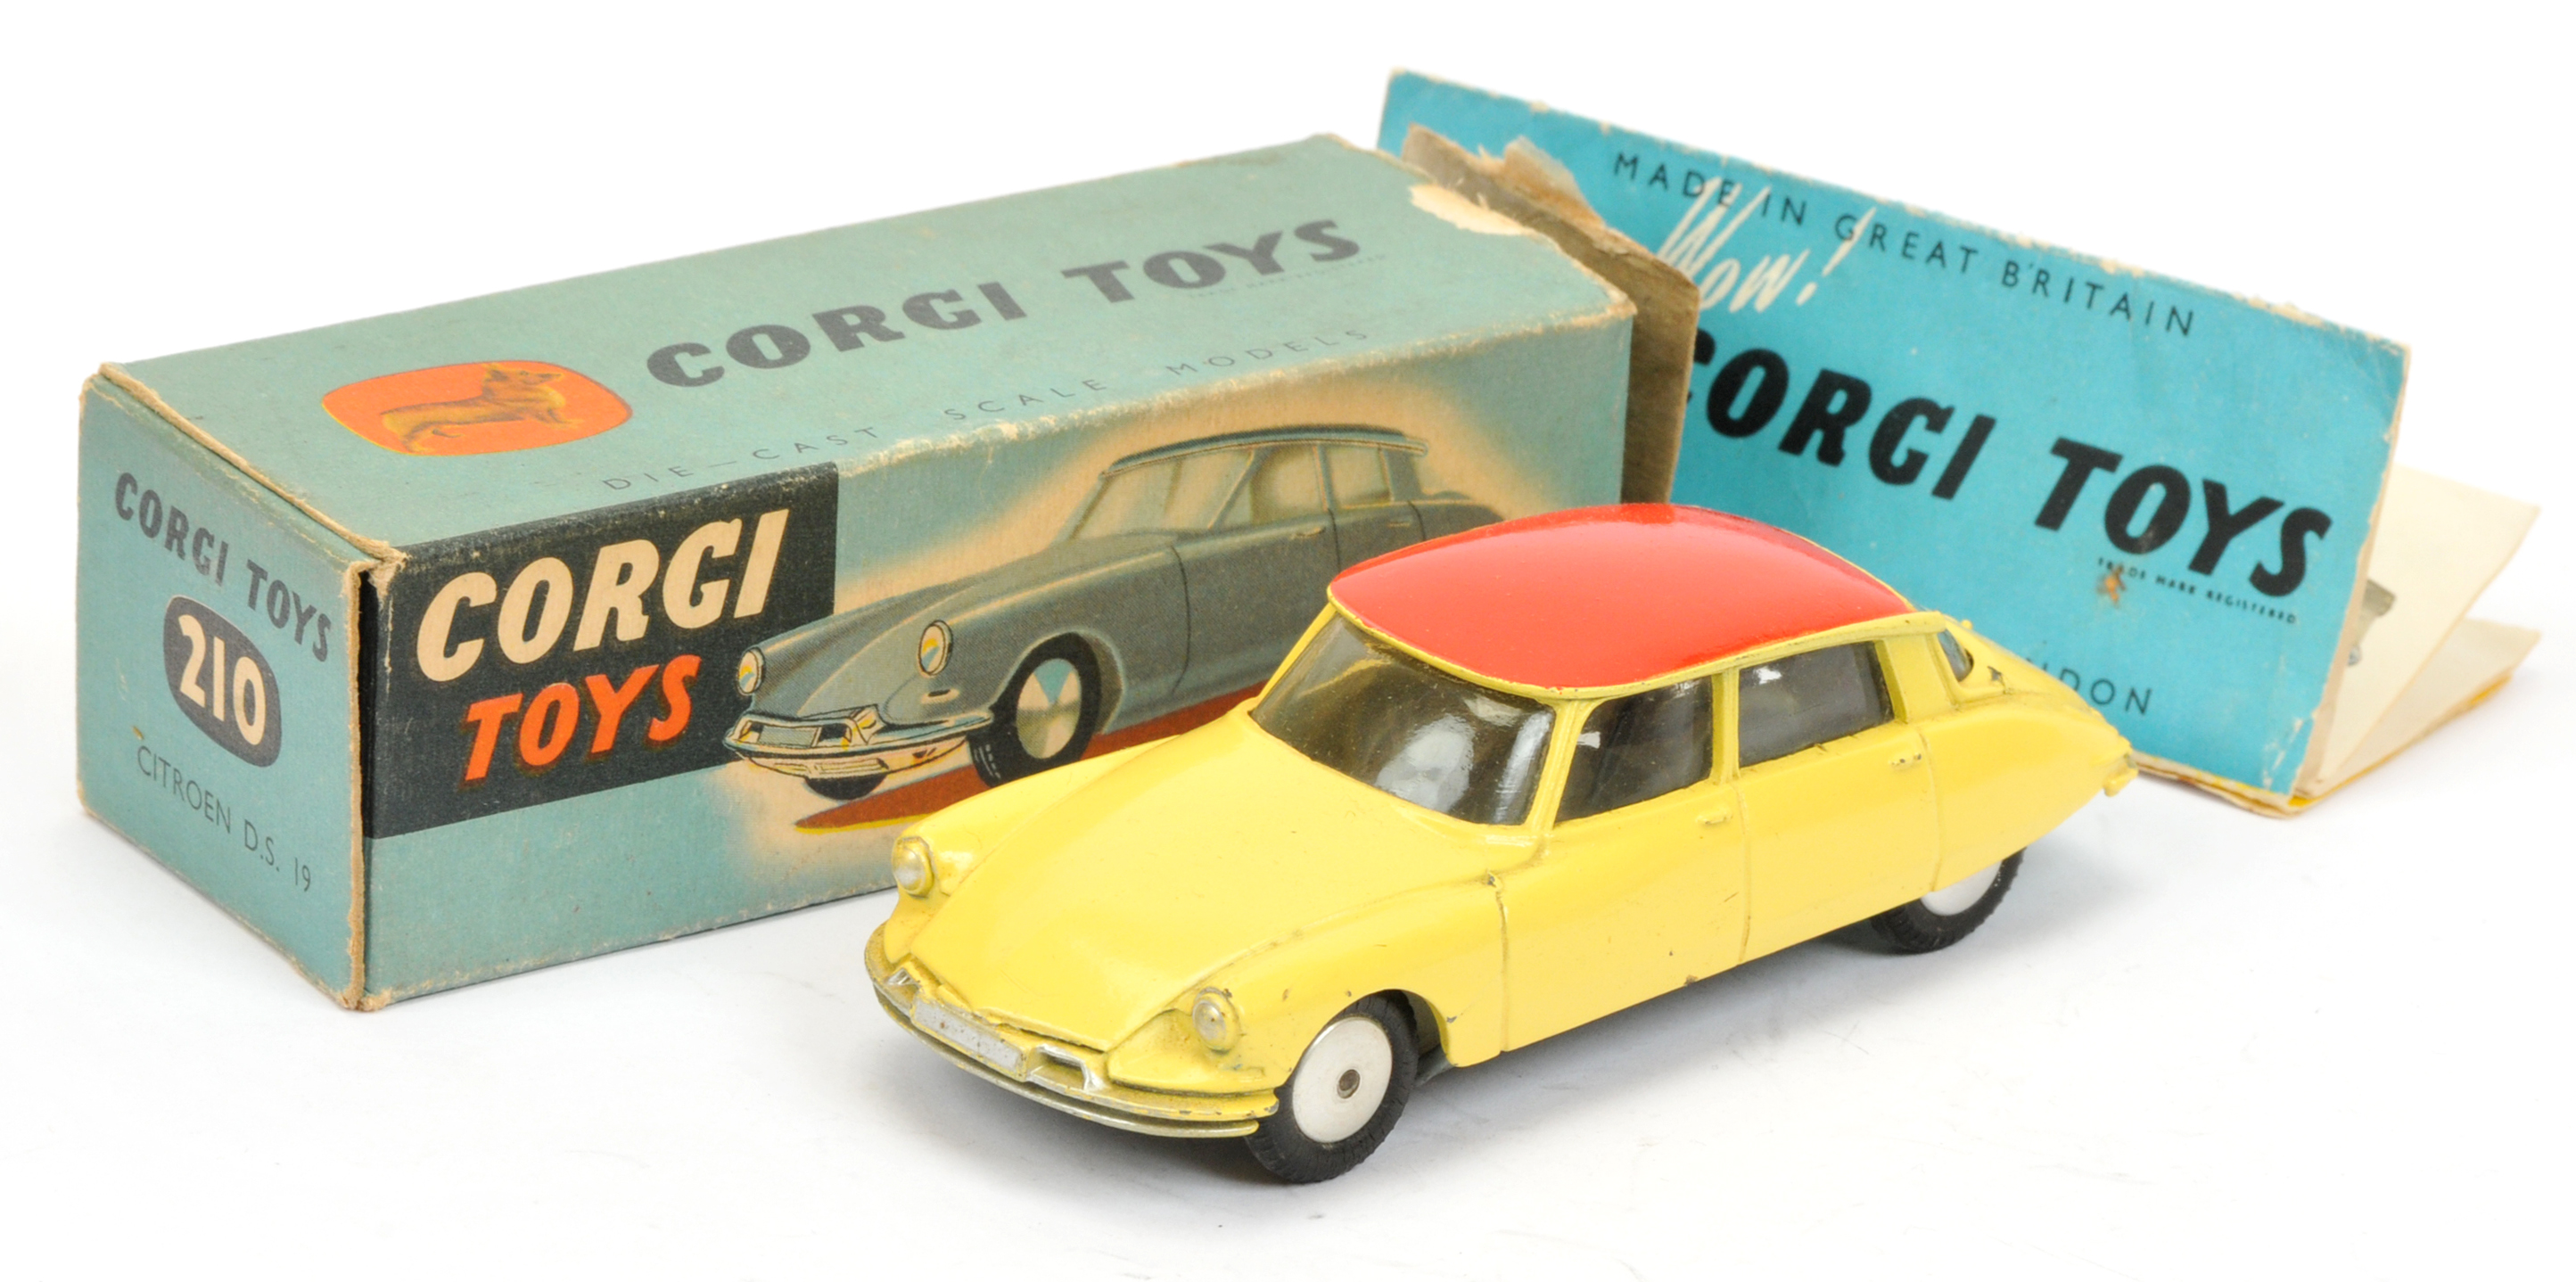 Corgi Toys 210 Citroen DS10 - Yellow body with red roof,, silver trim and flat spun hubs